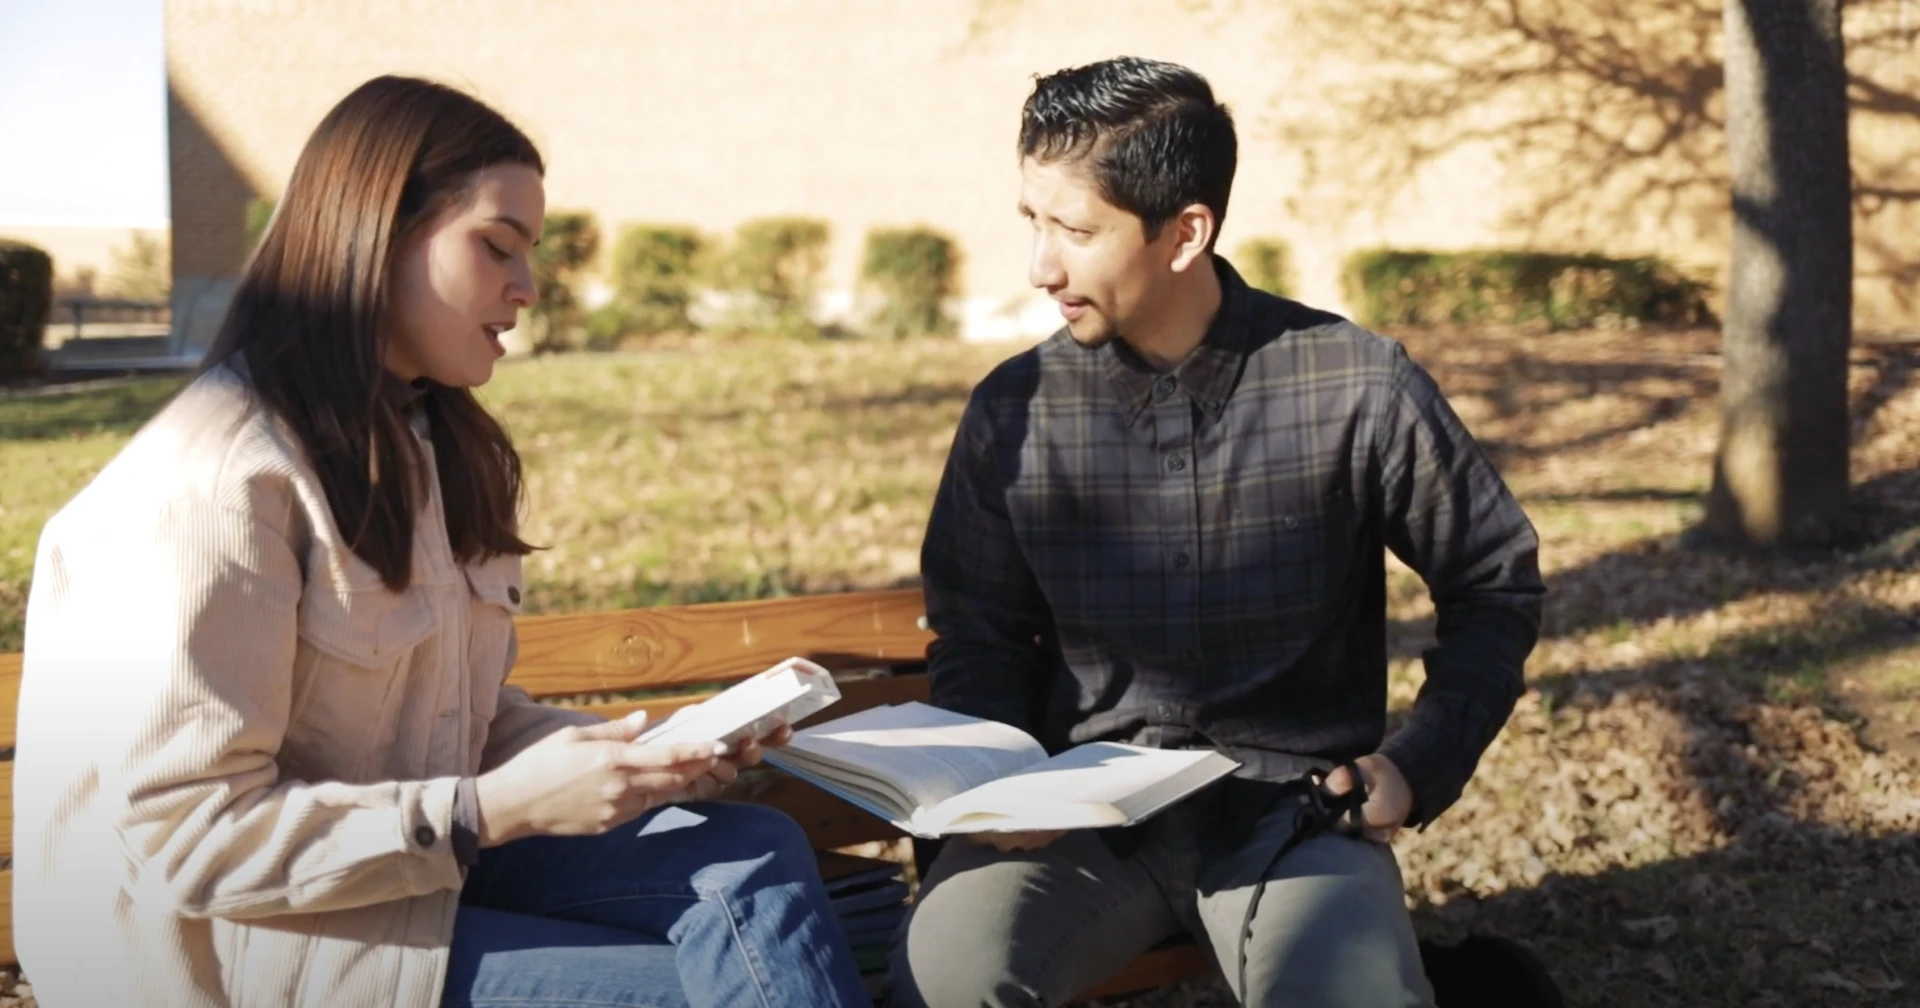 Two students sit on a bench holding books and talking